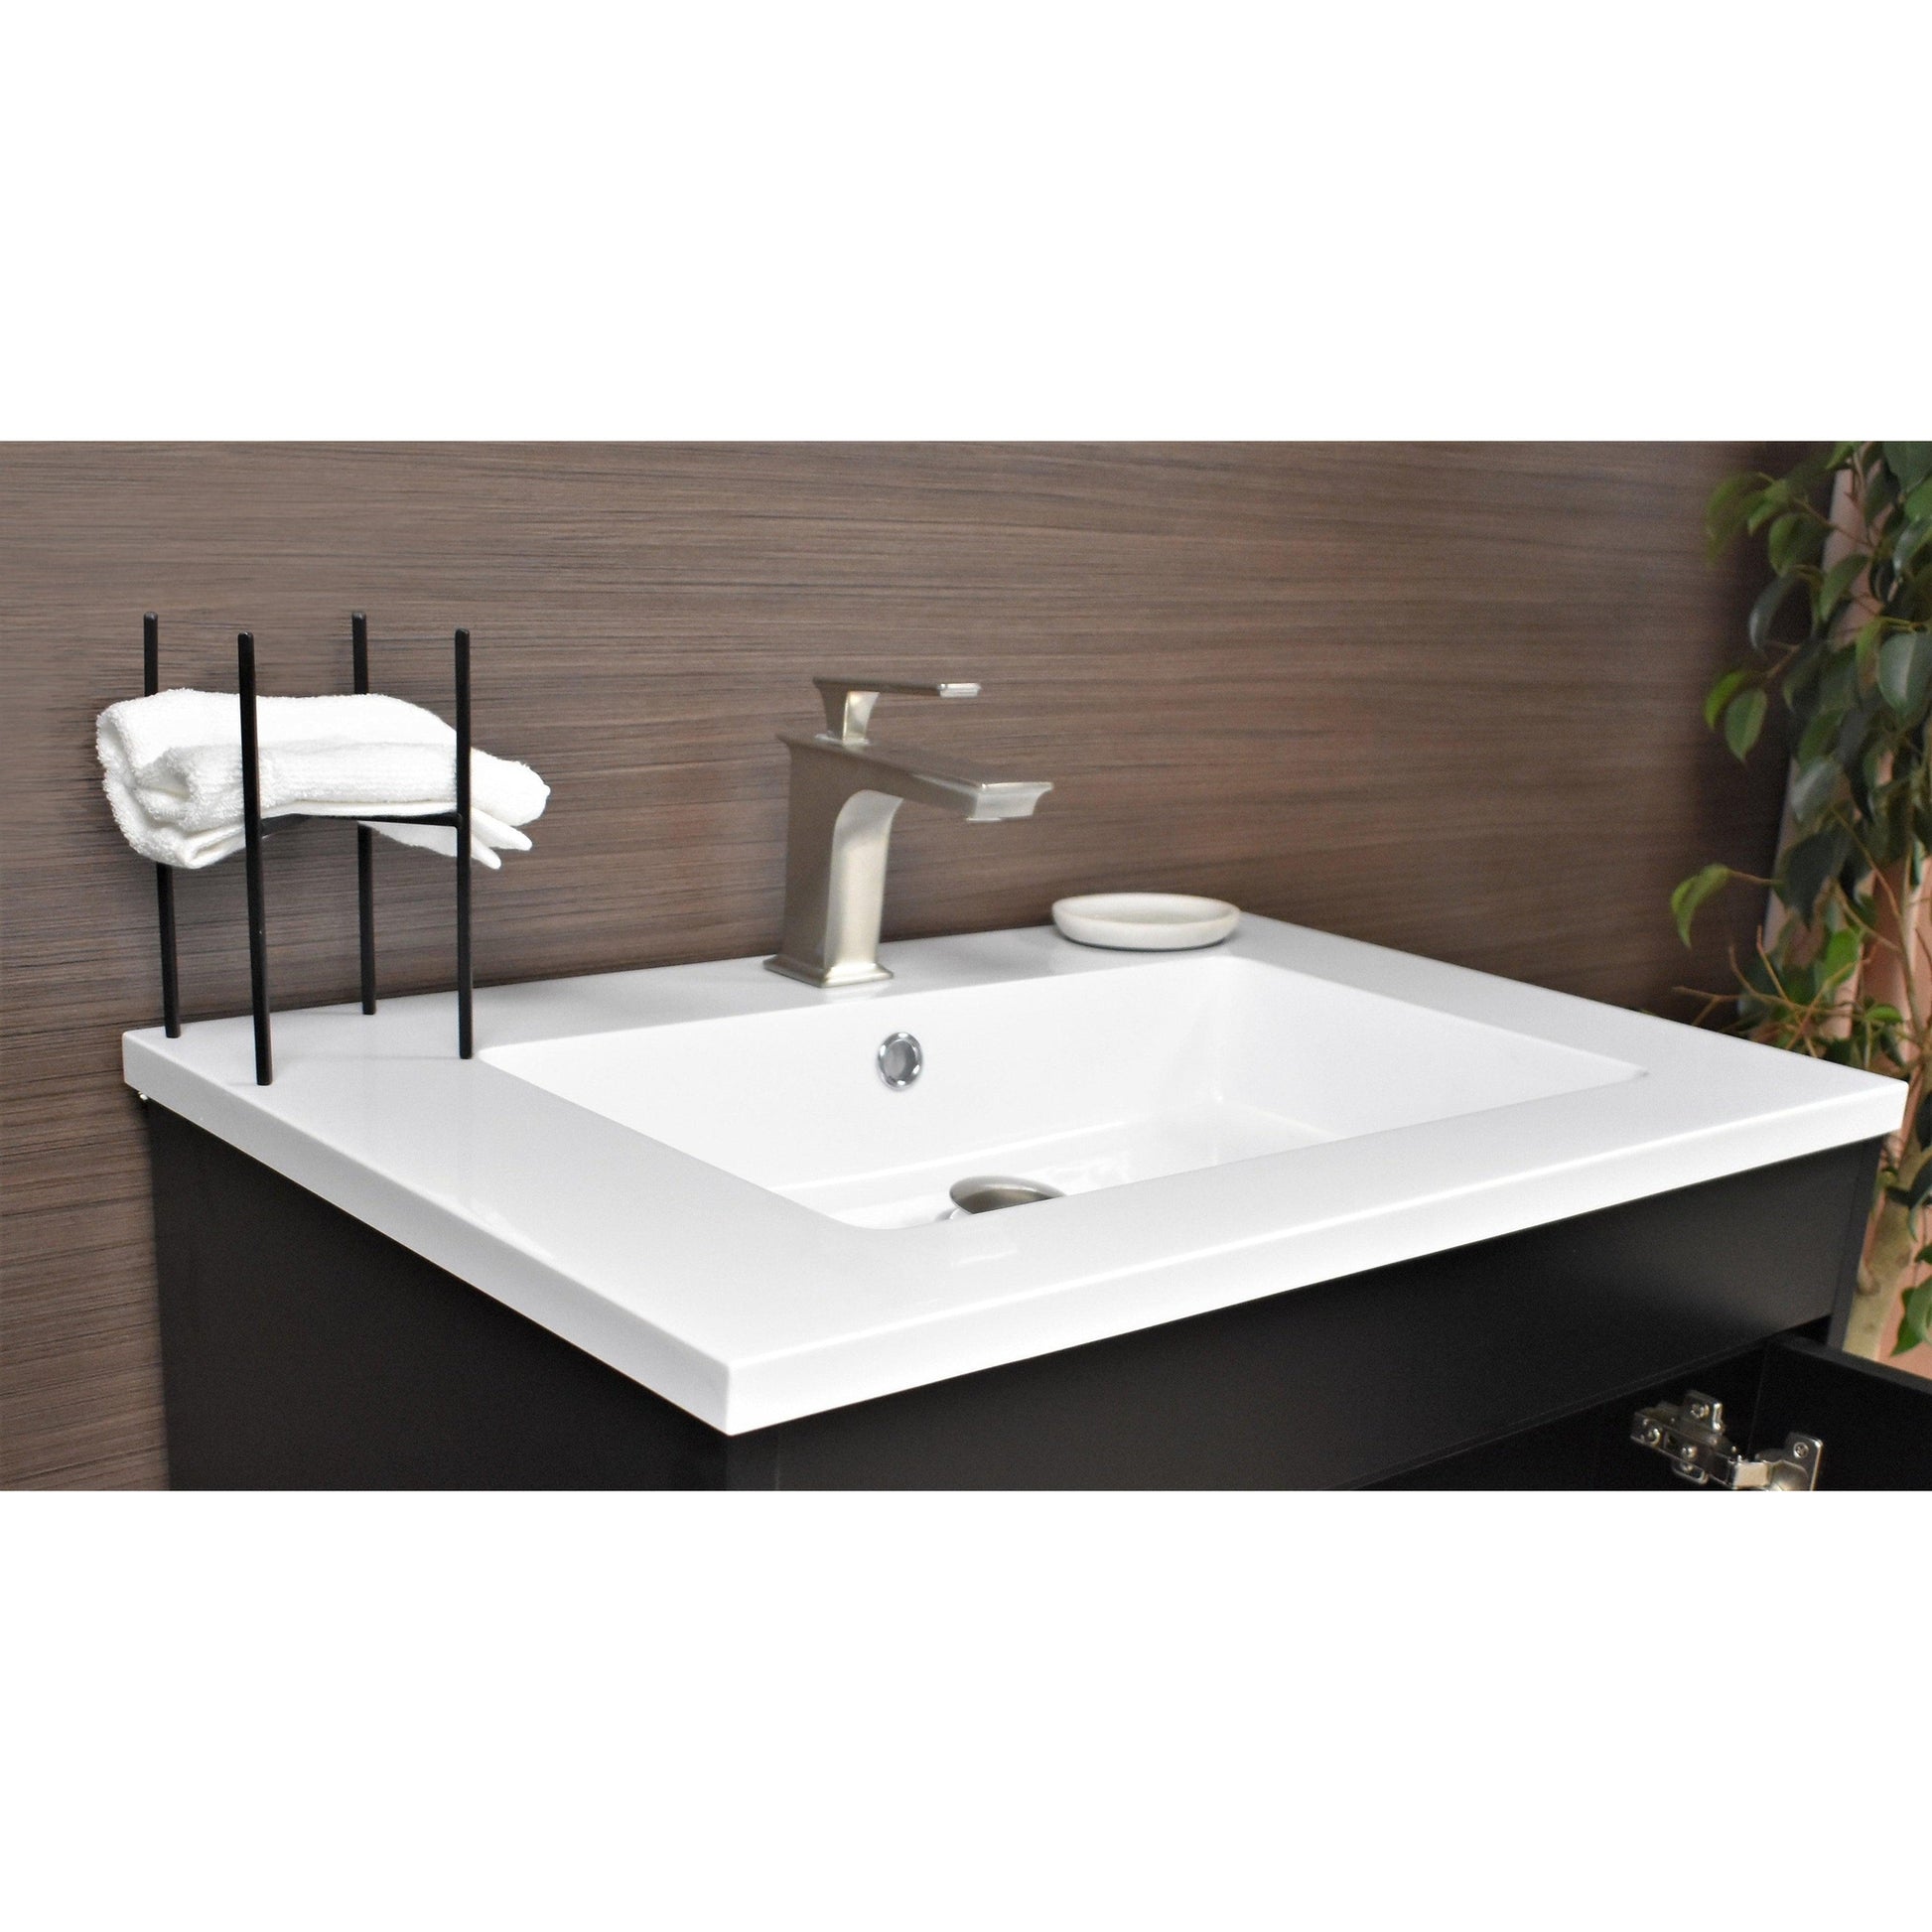 Volpa USA Rio 30" Black Freestanding Modern Bathroom Vanity With Integrated Acrylic Top and Brushed Nickel Handles